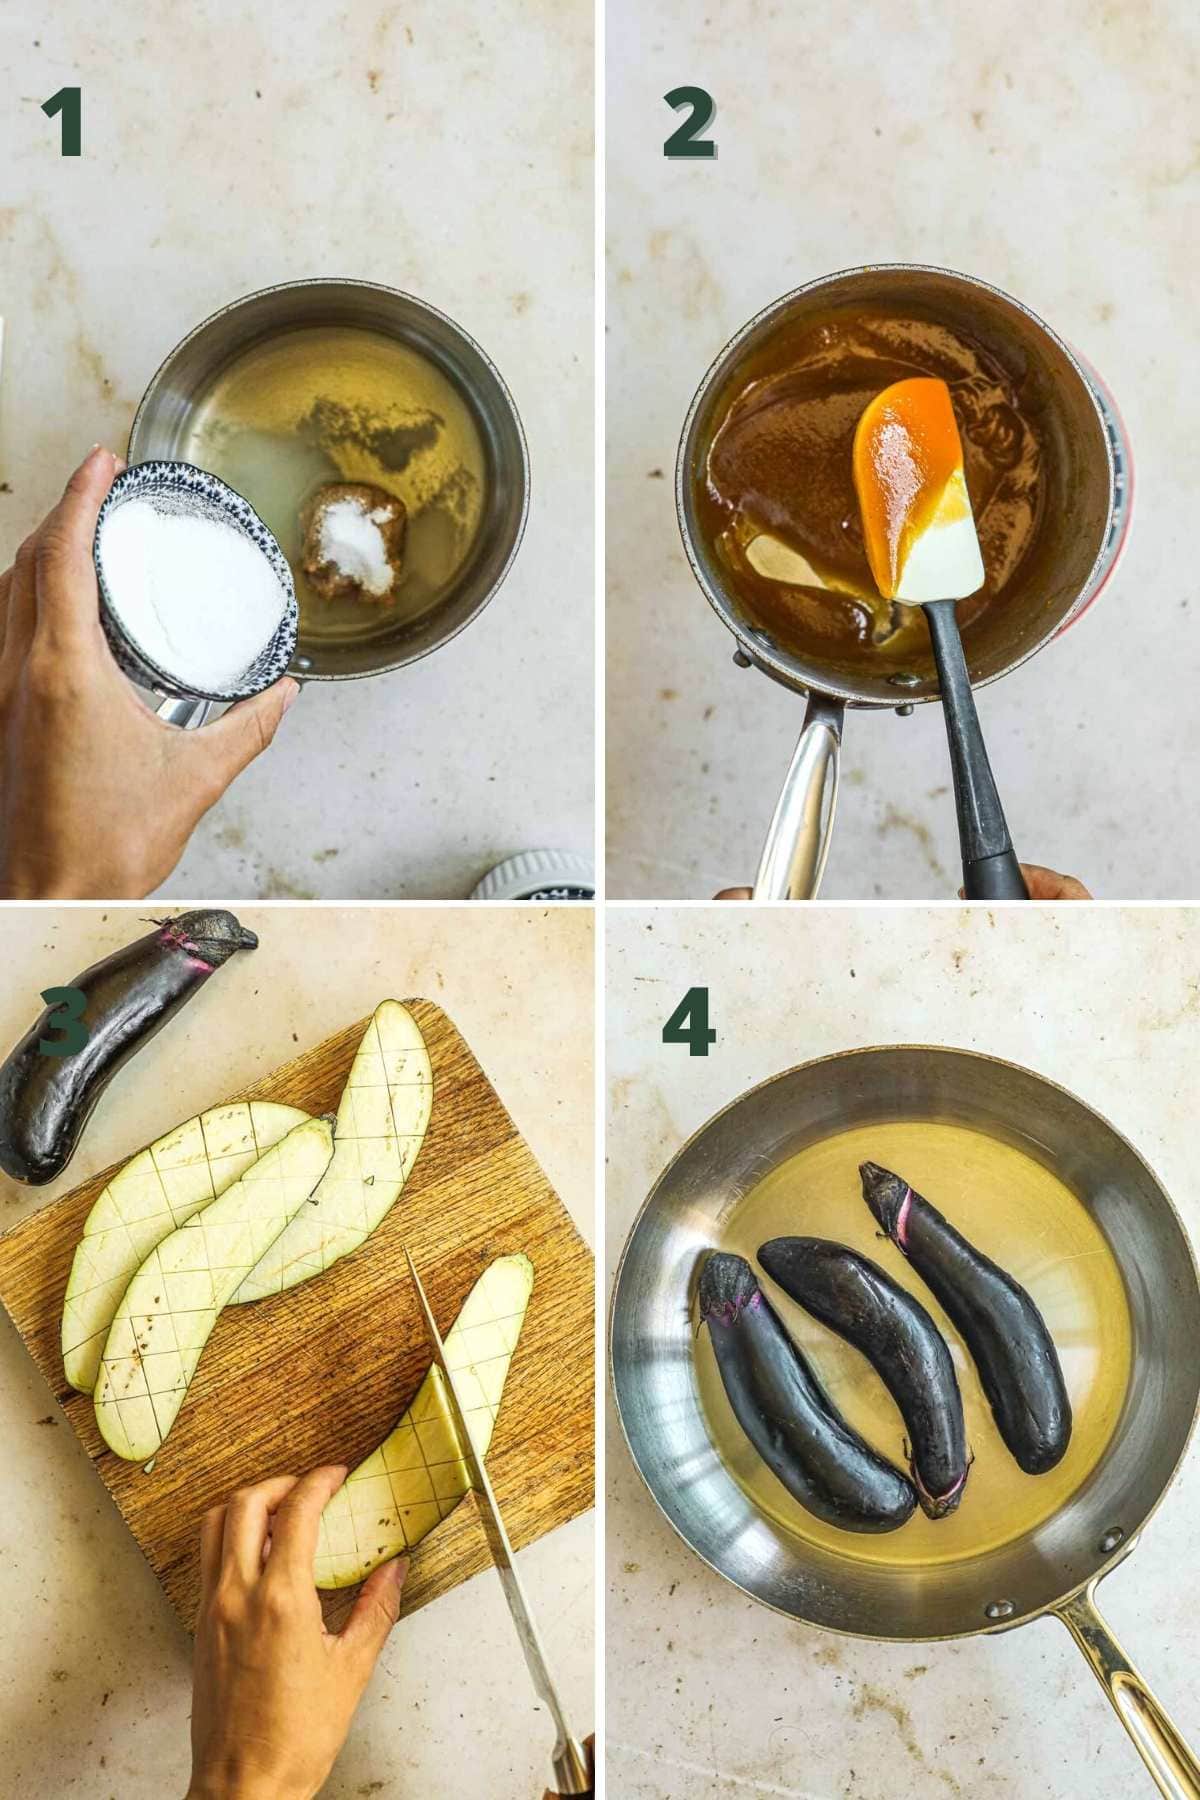 Instructions to make miso glazed Japanese eggplant, including making the miso sauce, slicing the eggplant in a crosshatch pattern, and frying the eggplant in a skillet.